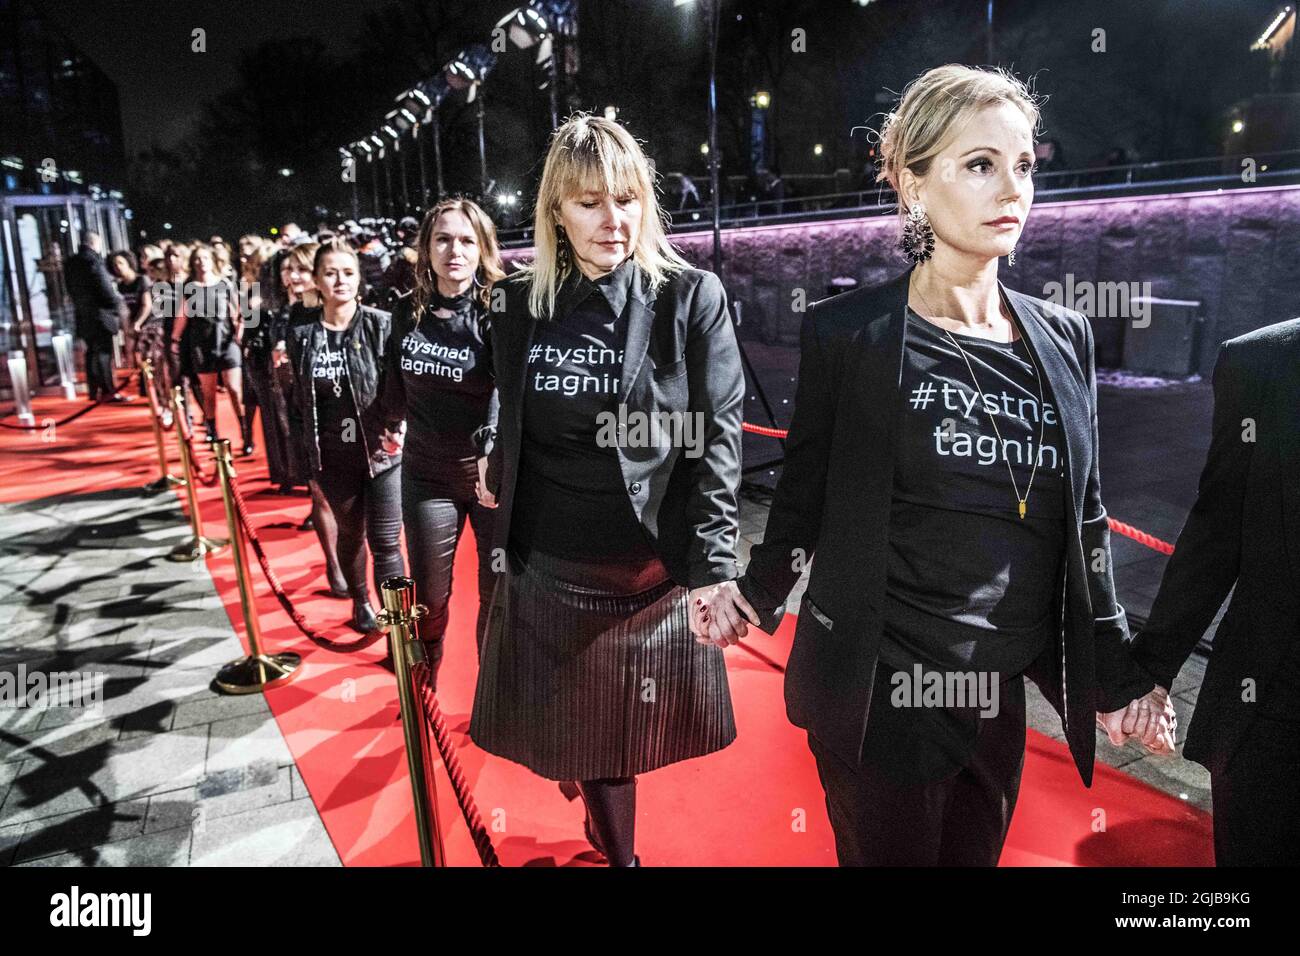 Sofia Helin together with the actresses from the theater call #tystnadtagning hand in hand at the Guldbagge Awards Stock Photo